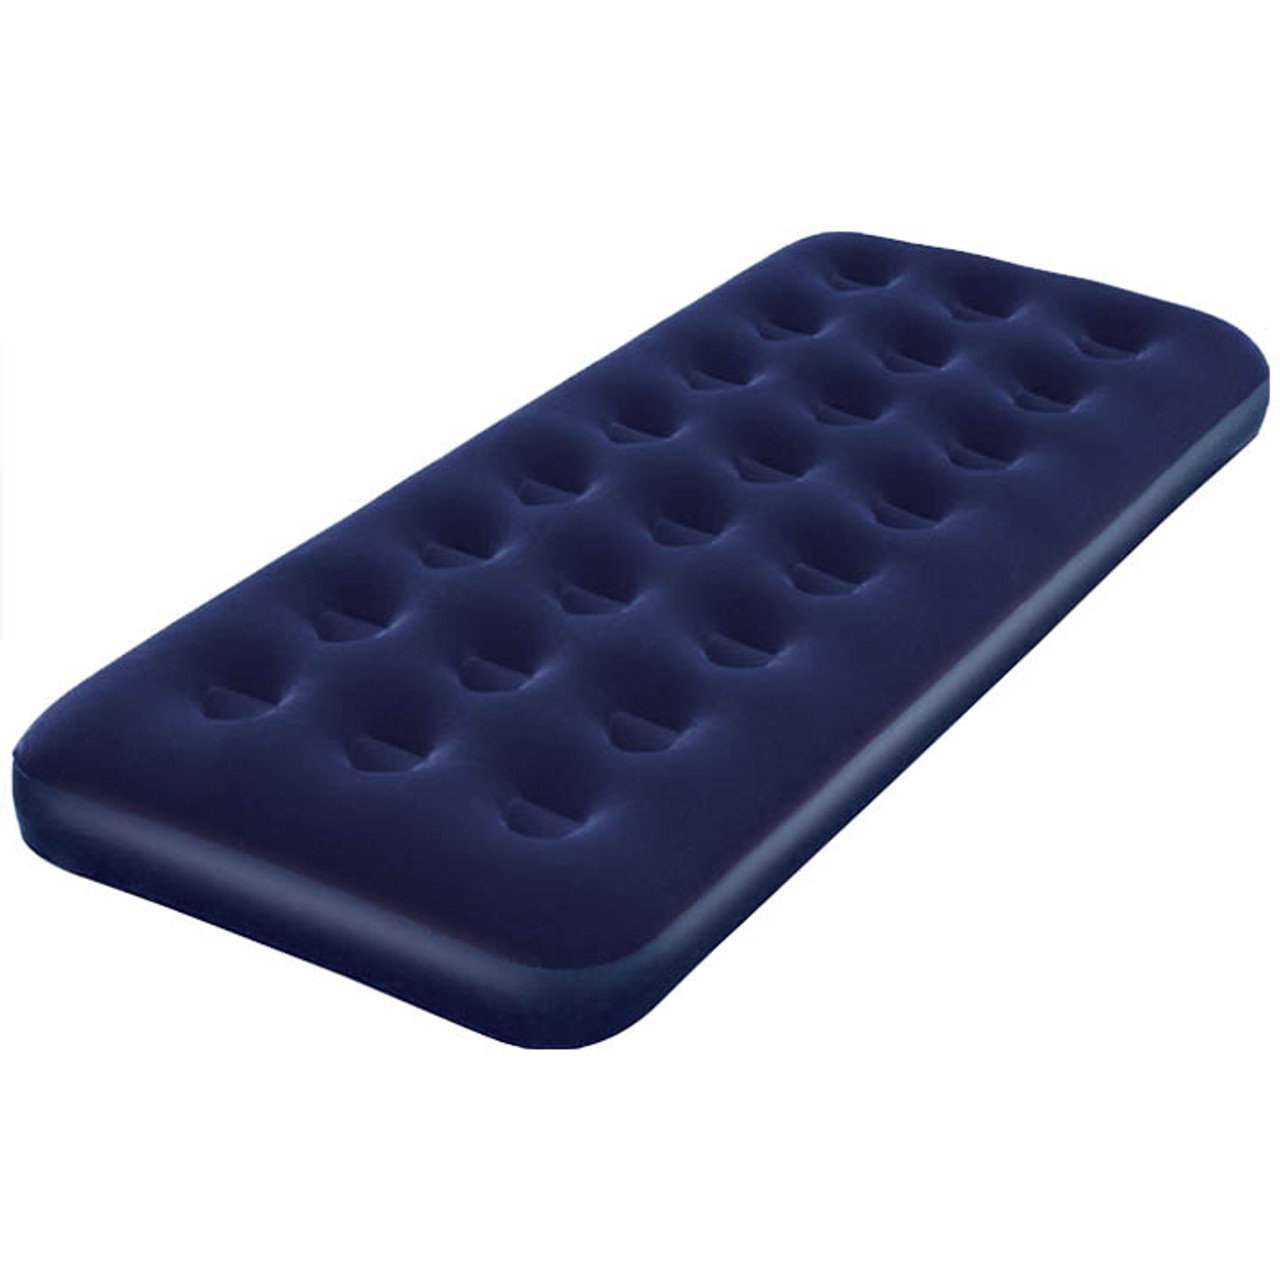 Comfort Quest Single Flocked Camping Air Bed Mattress